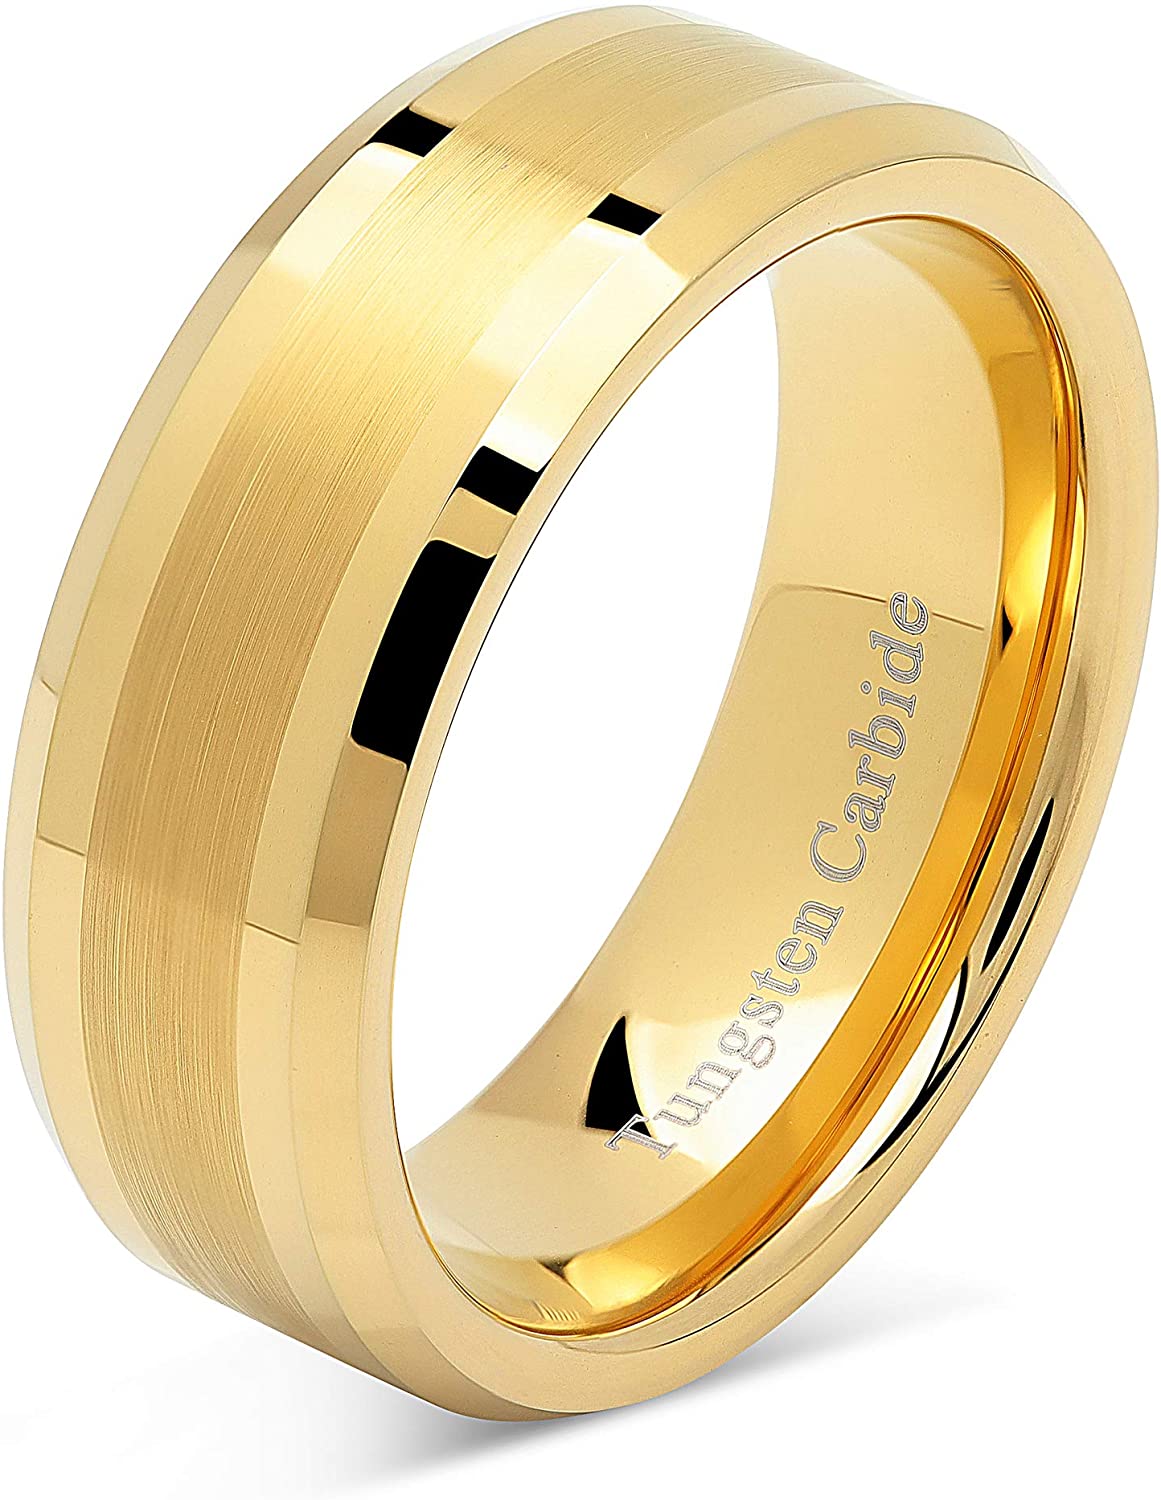 100S JEWELRY 8mm Men&#39;s Tungsten Carbide Ring Wedding Band 14k Gold Plated  Jewelry Bridal Size 8-16 | Amazon.com